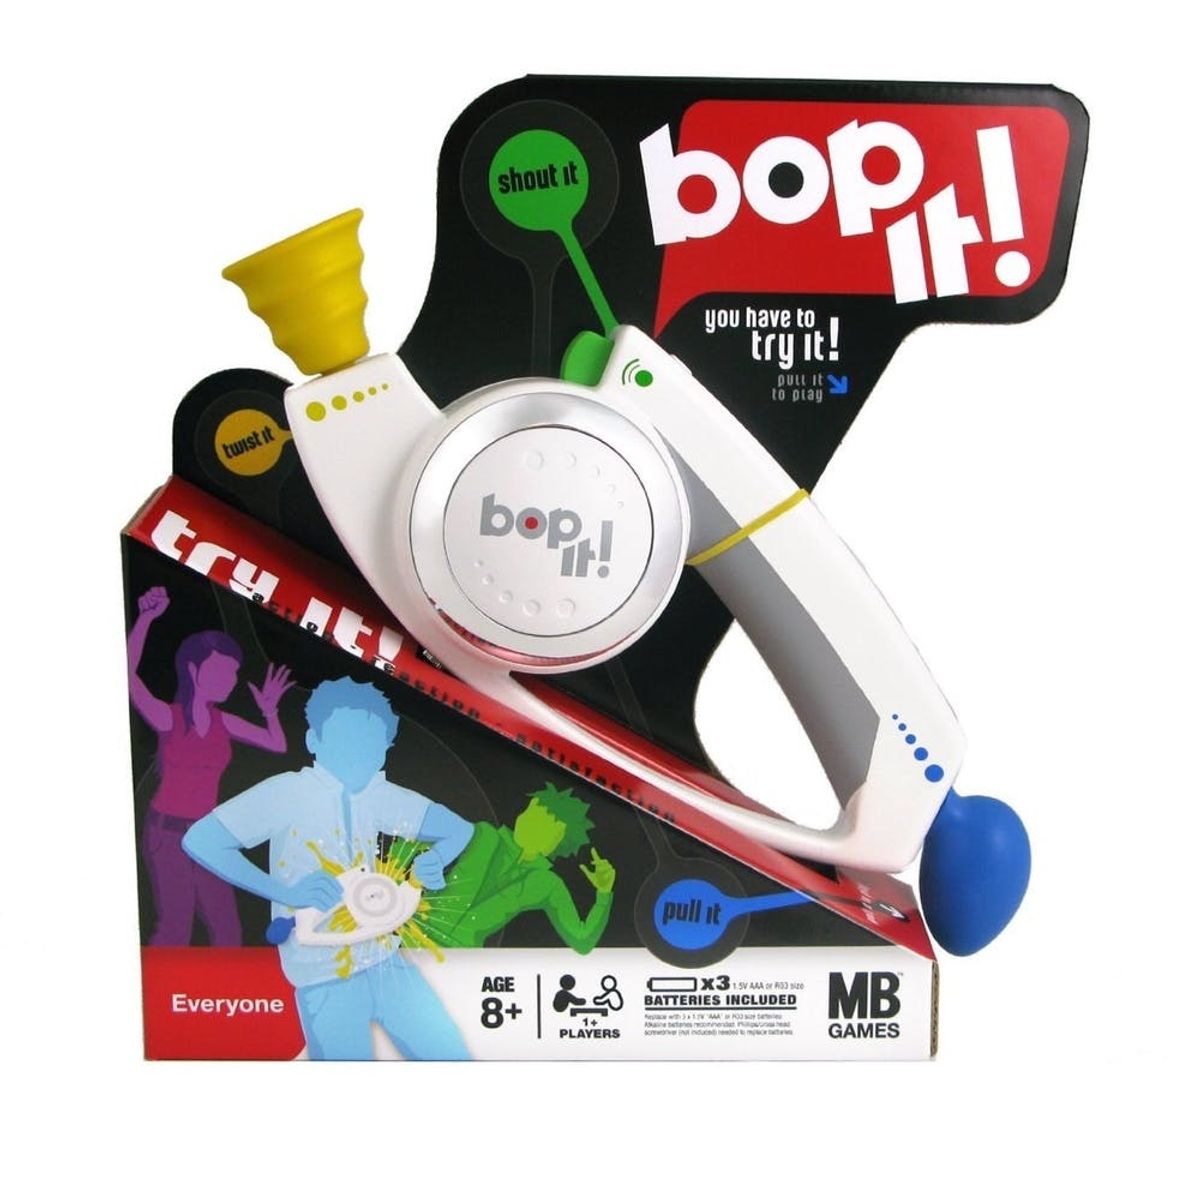 Uber Is Bringing Back Bop It for a Very Sad Reason